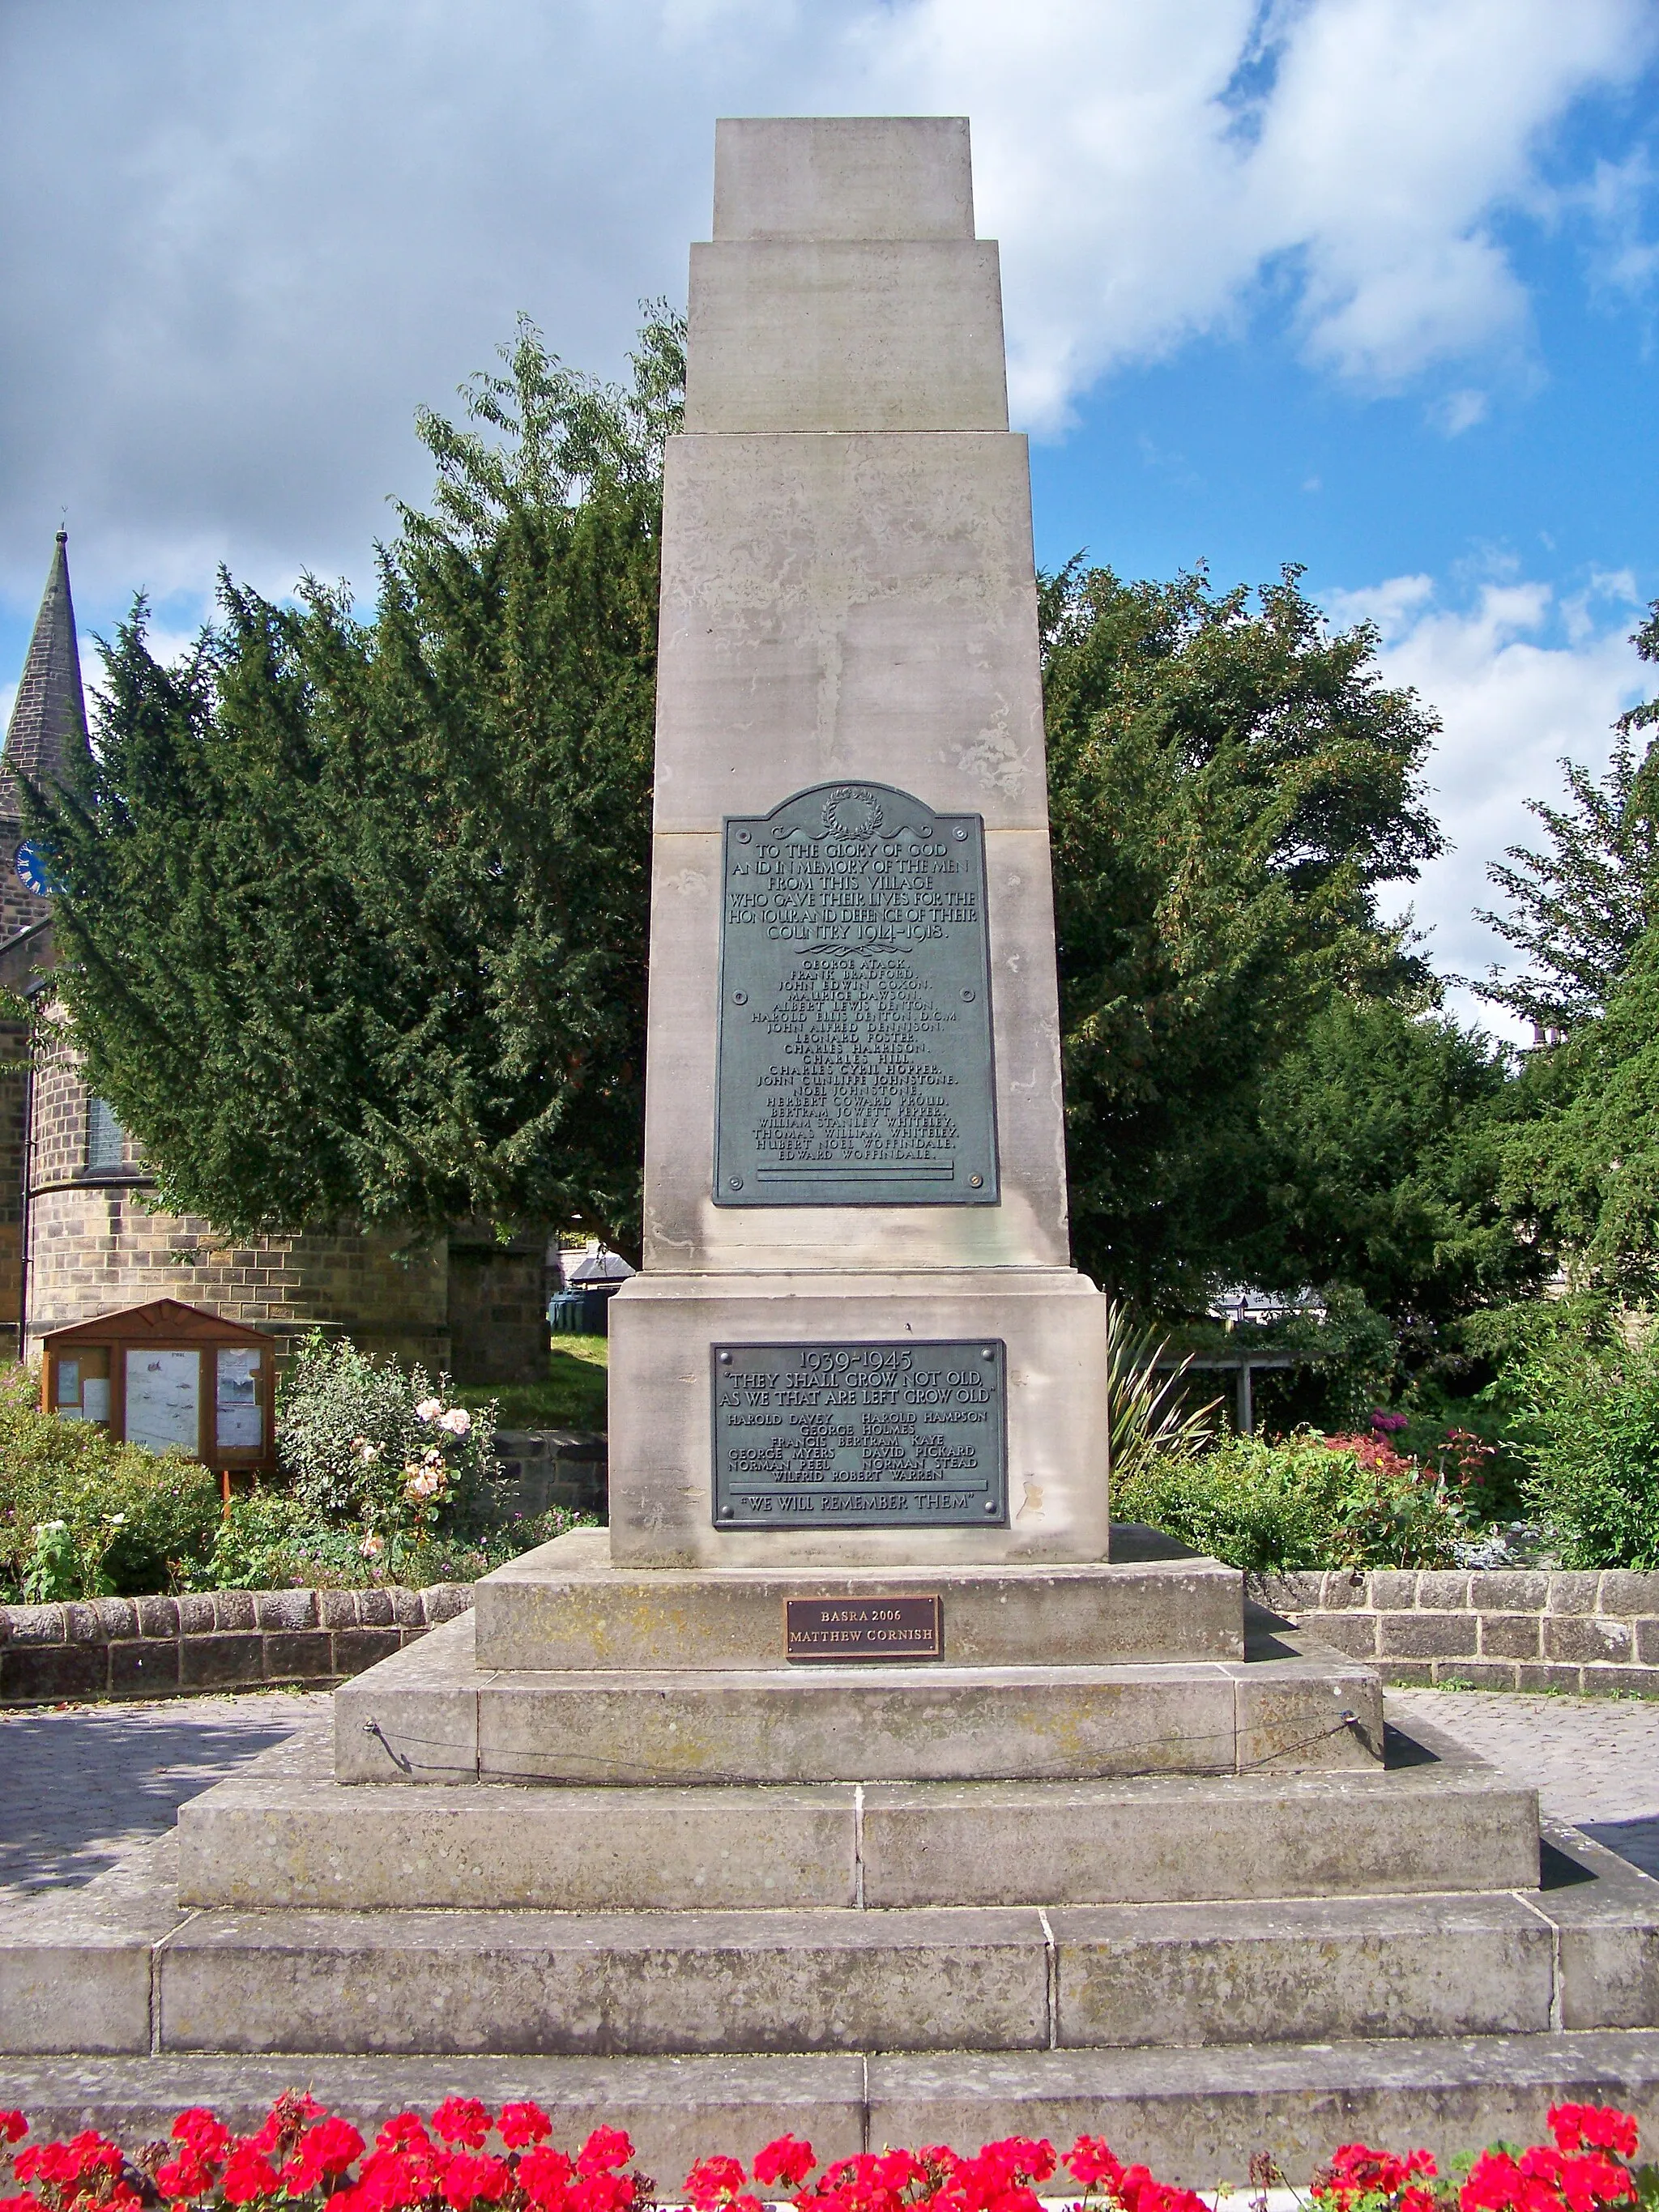 Photo showing: The war memorial in Pool-in Wharfedale, West Yorkshire.  The memorial lists those from Pool who dies in the Great War, World War II and the 2003- Iraq War.  The photograph was taken on the morning of Saturday 22nd August 2009.